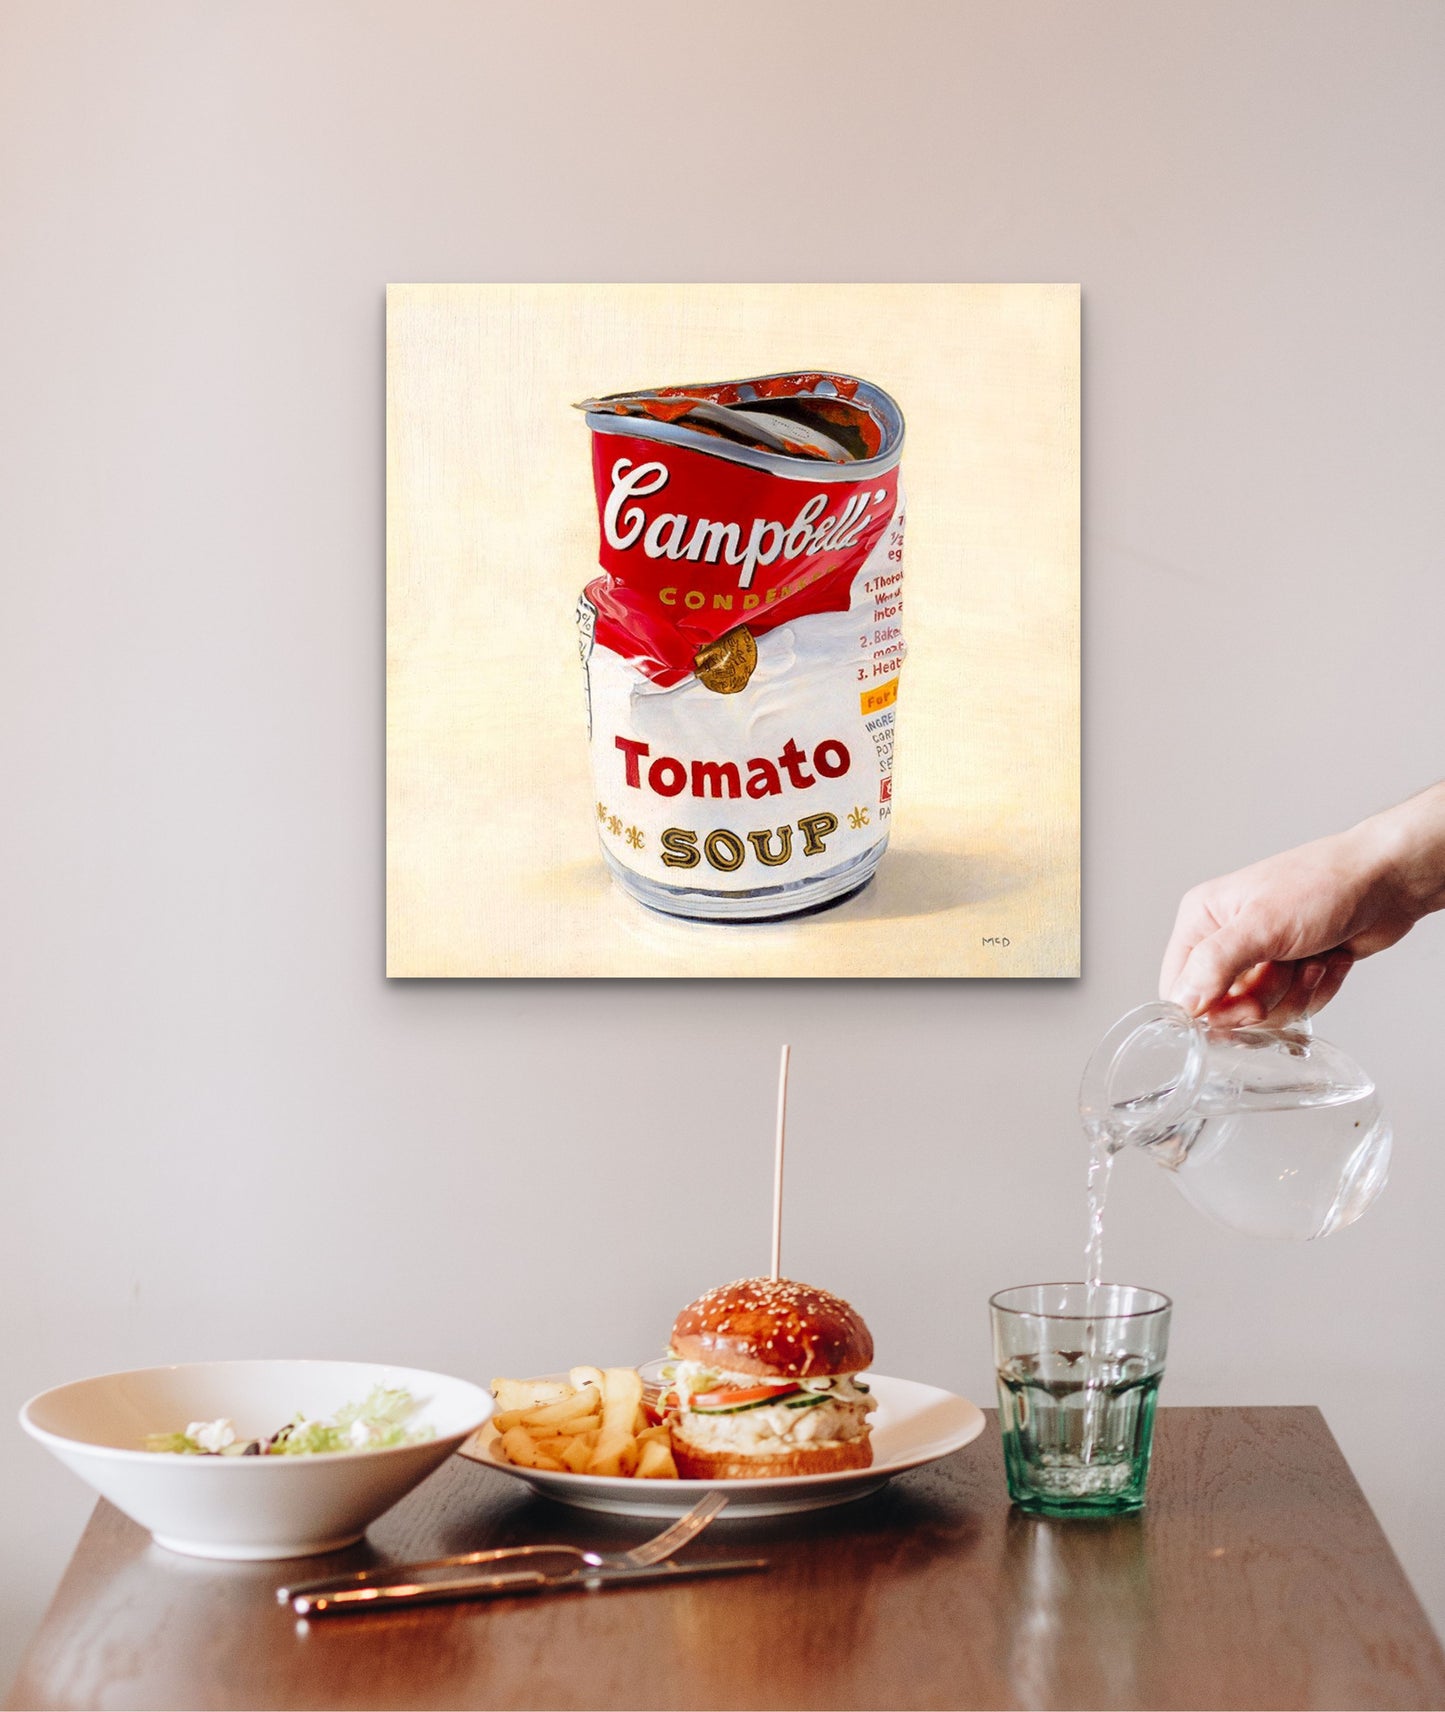 This hyperrealism wall art piece would look great in your kitchen, dining room or entrance way.  